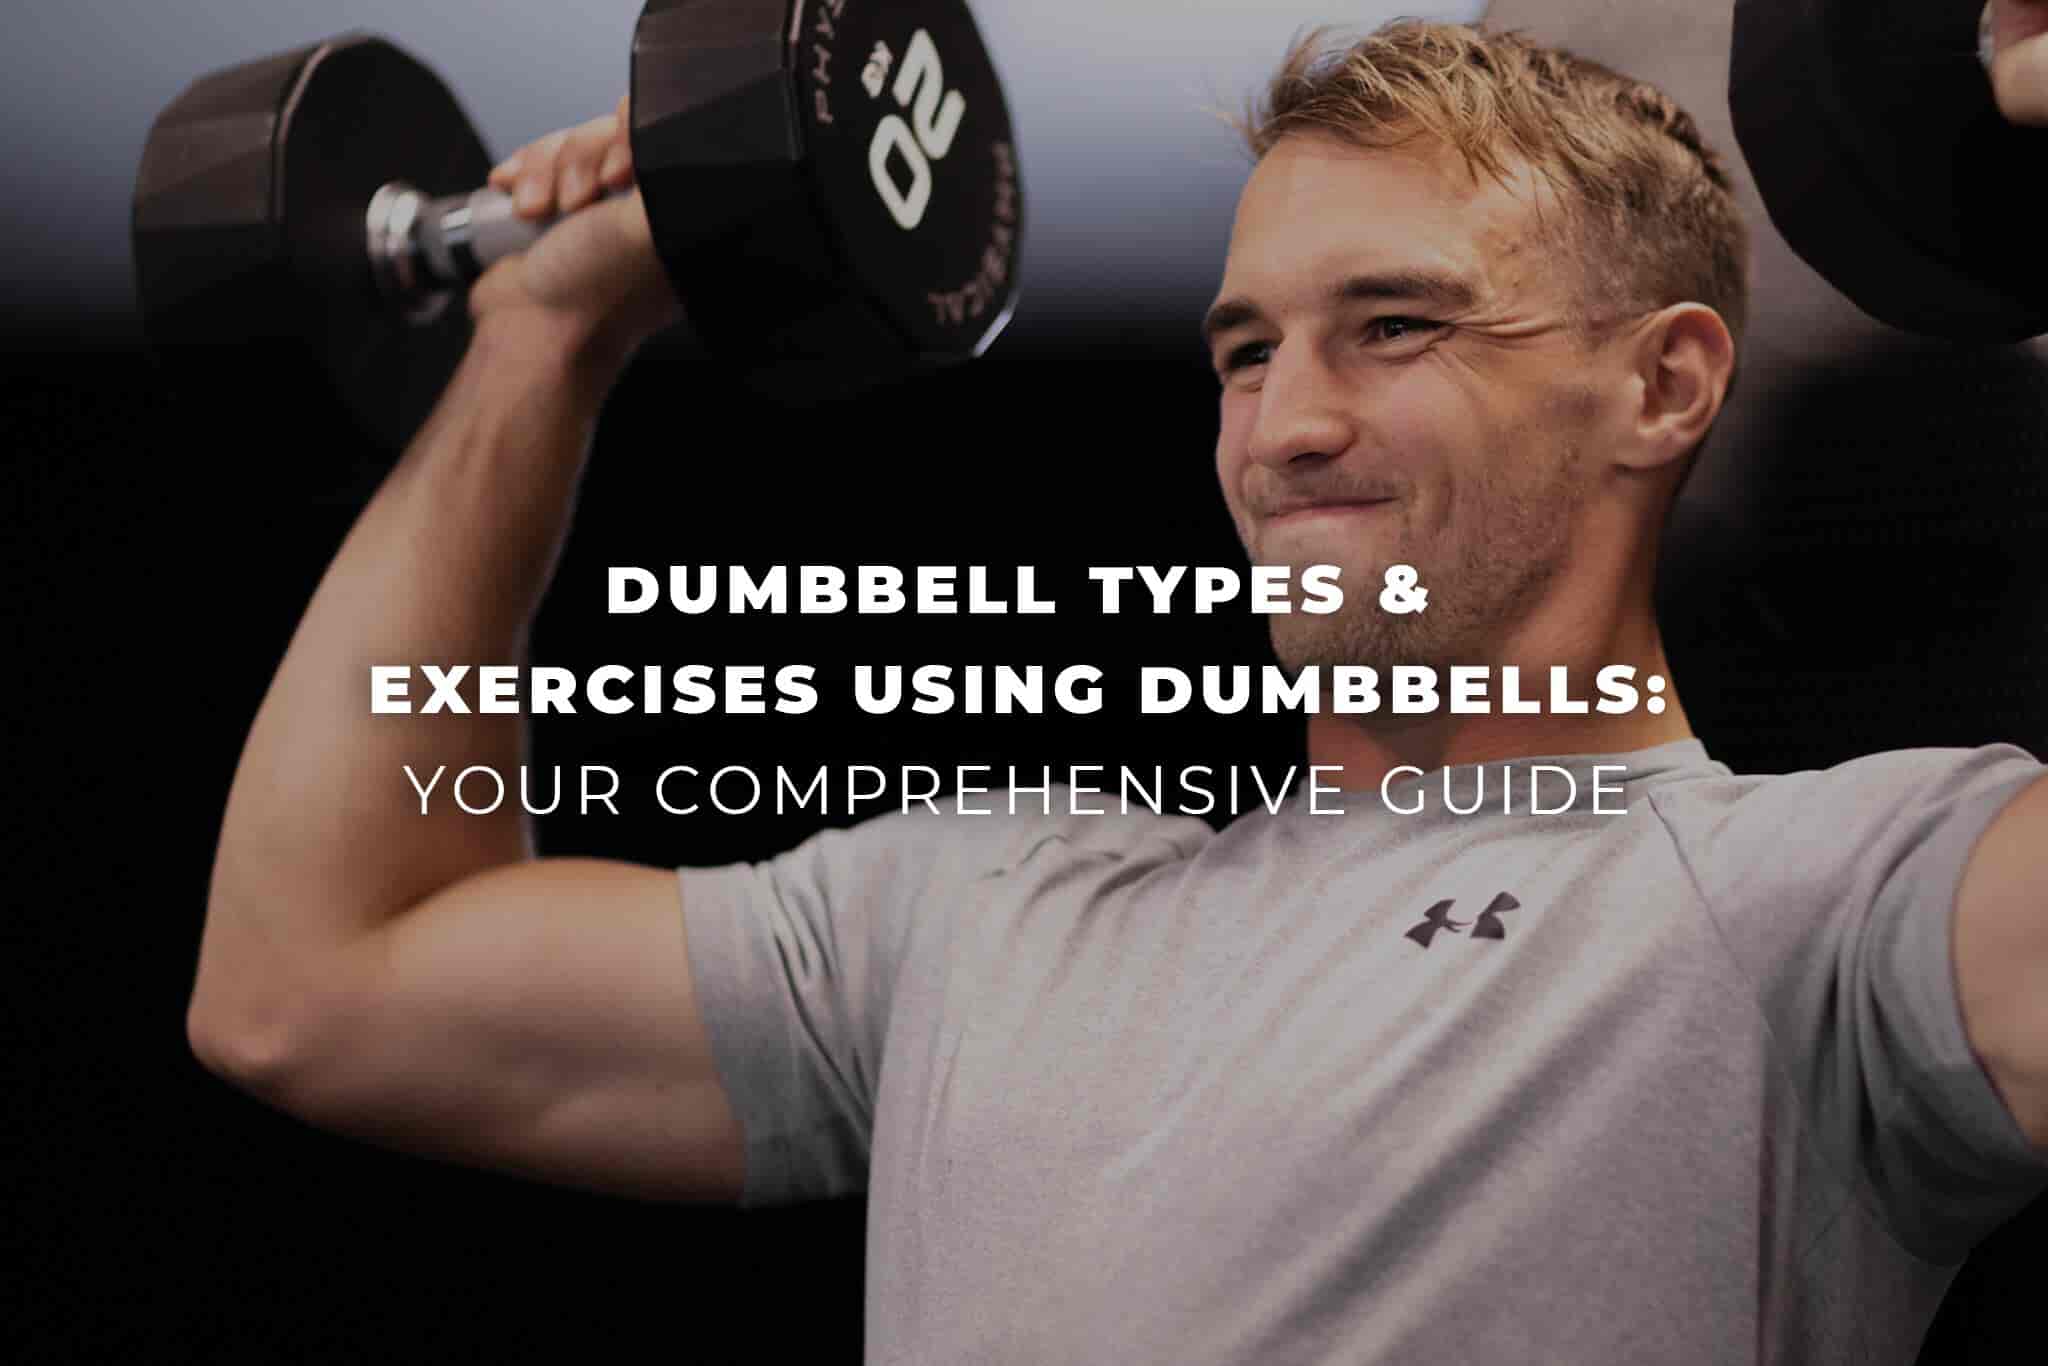 Dumbbell types & exercises using dumbbells: Your comprehensive guide